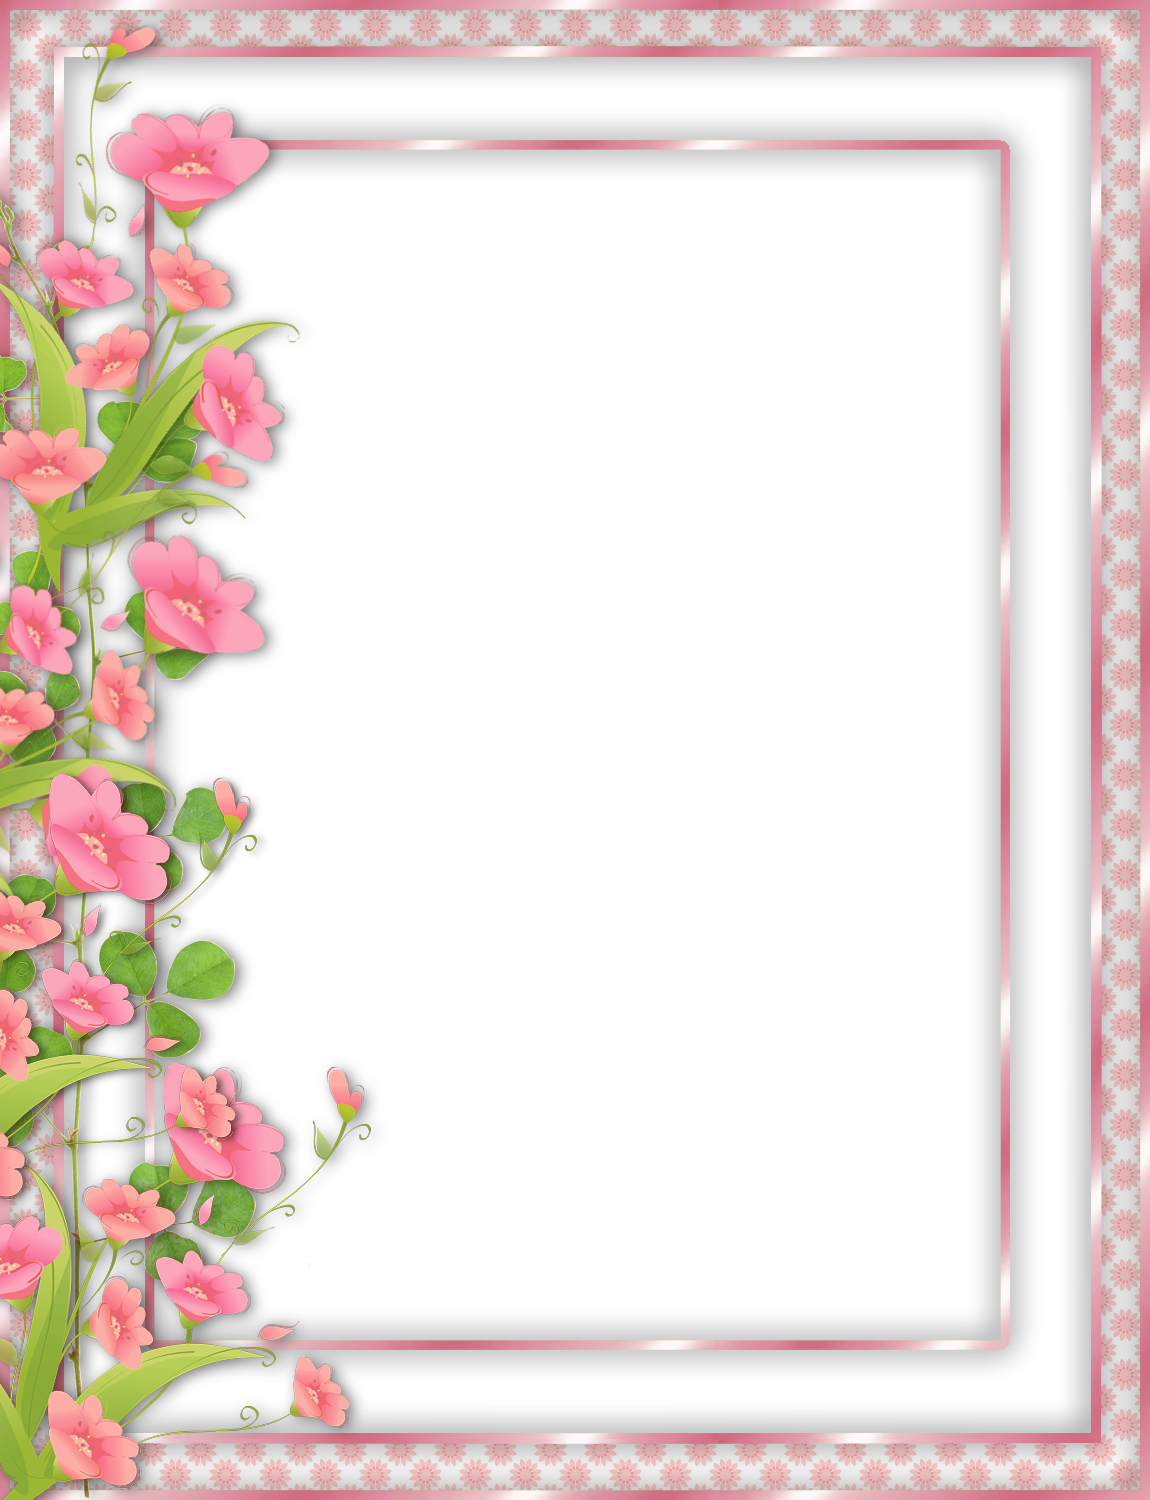 Flowers Borders Png Flowers Frame Border Png